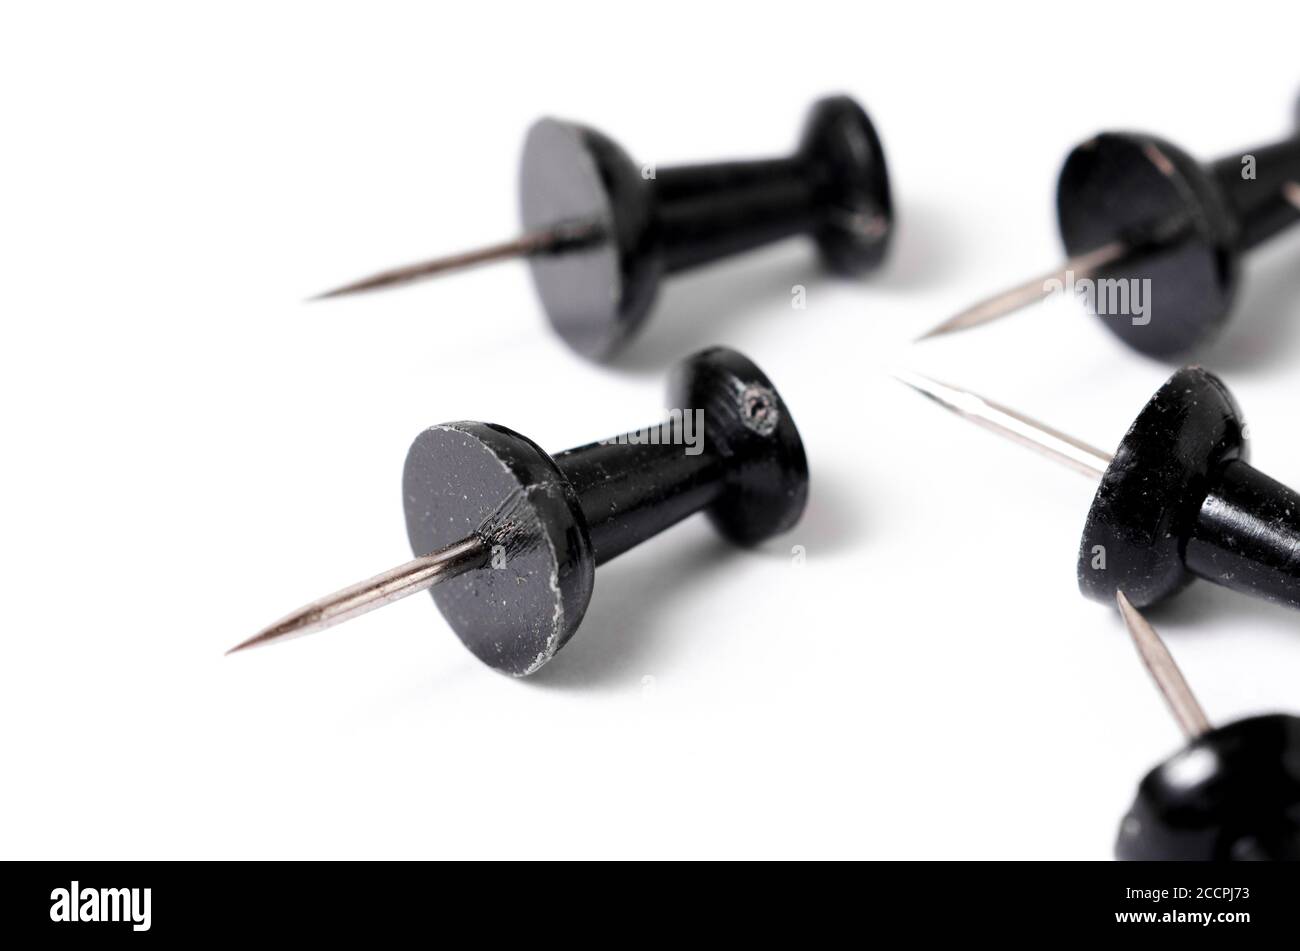 Close-up of black pins, tacks or thumbtacks with metal spiky tip, isolated on white surface or background, flat lay, indoors, studio Stock Photo